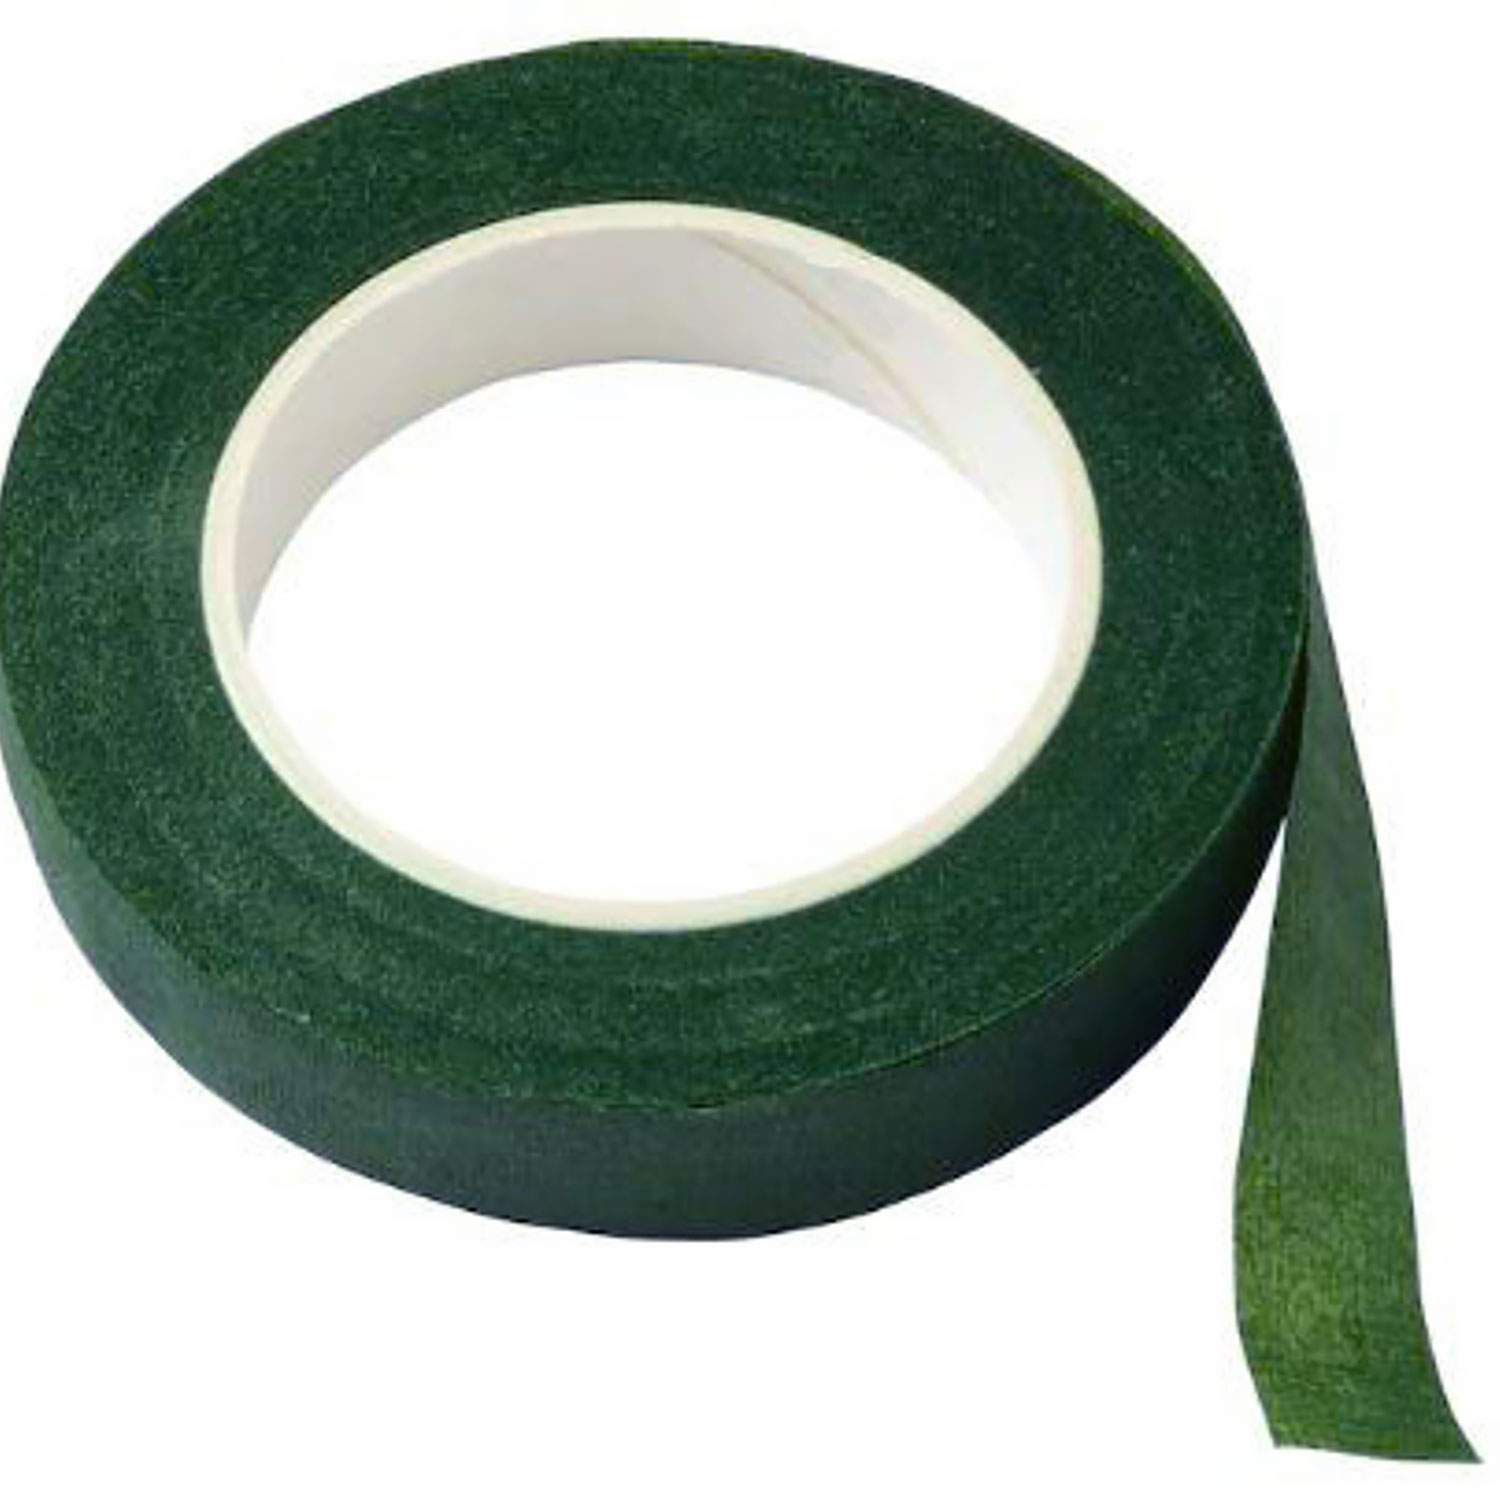 Floral Tape Moss Green Floral Tape Fake Flower Supplies 